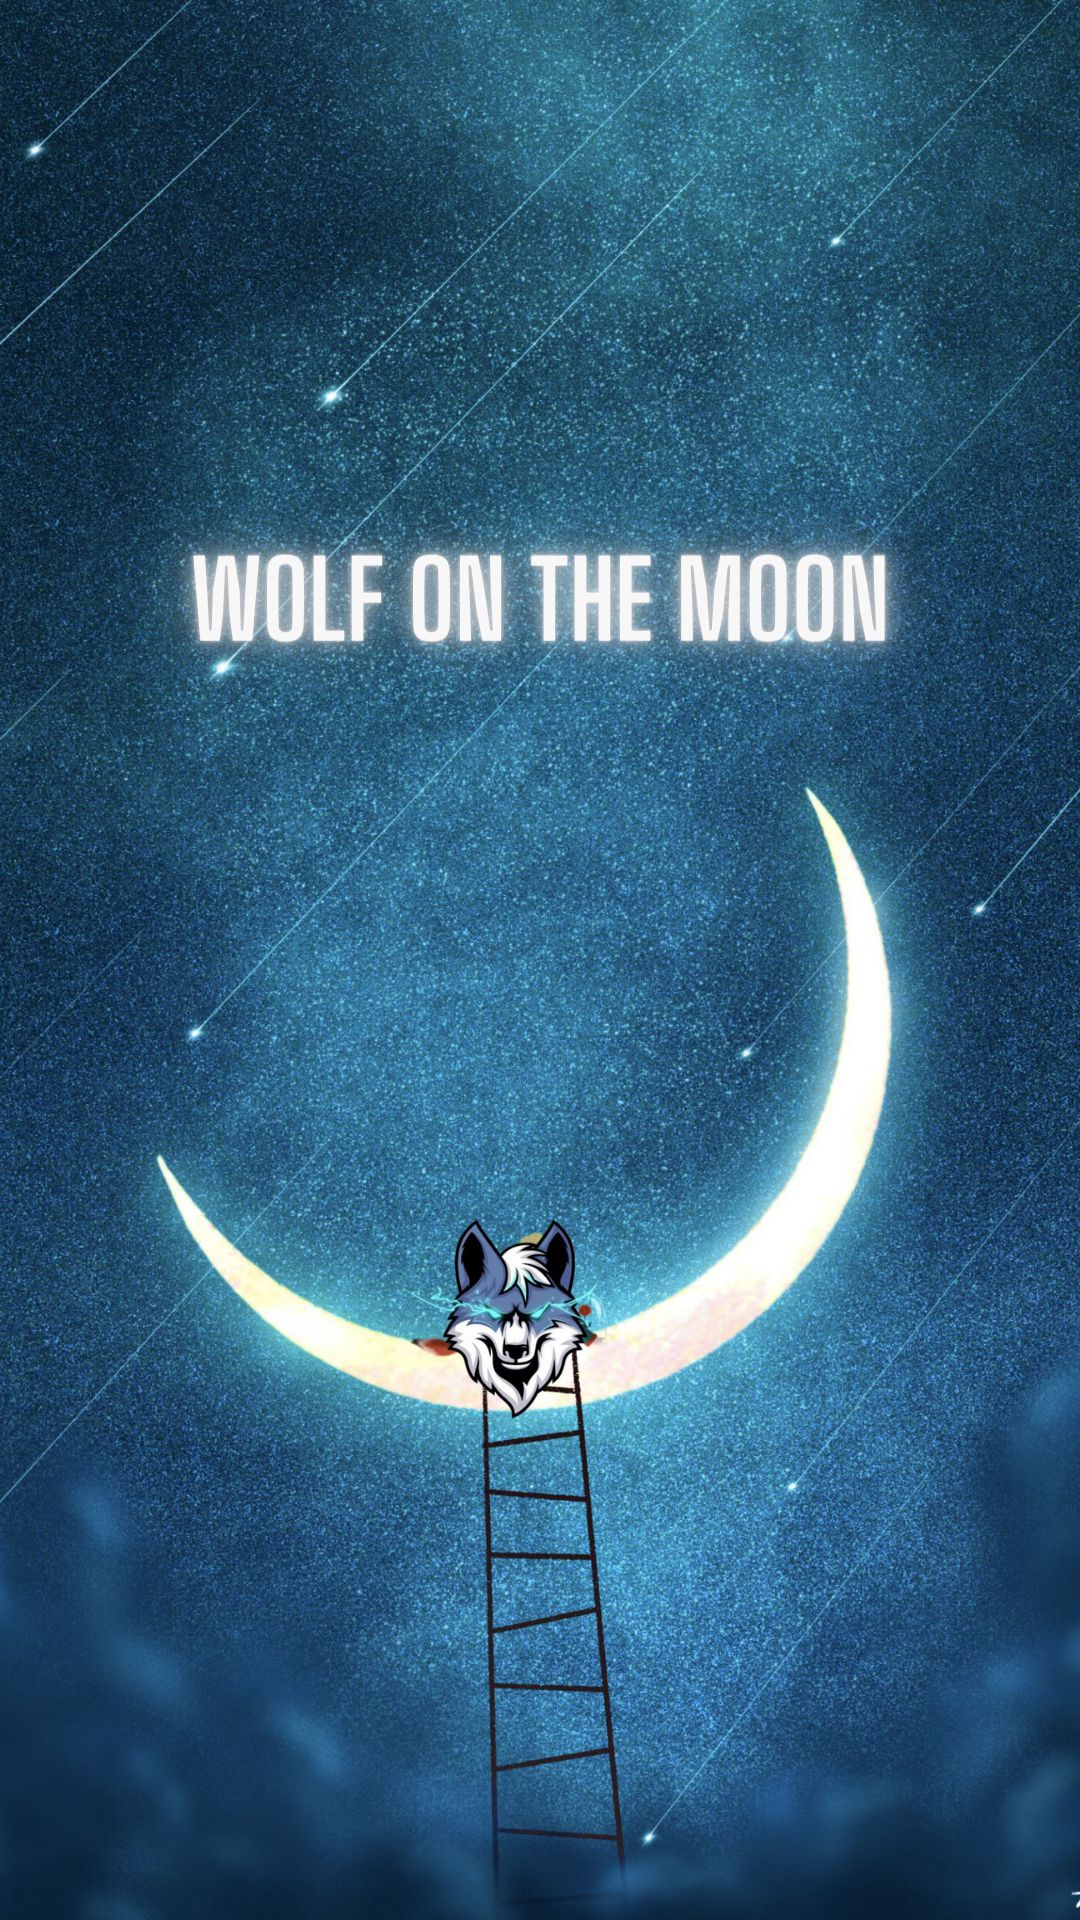 wolf on the moon.png.jpg